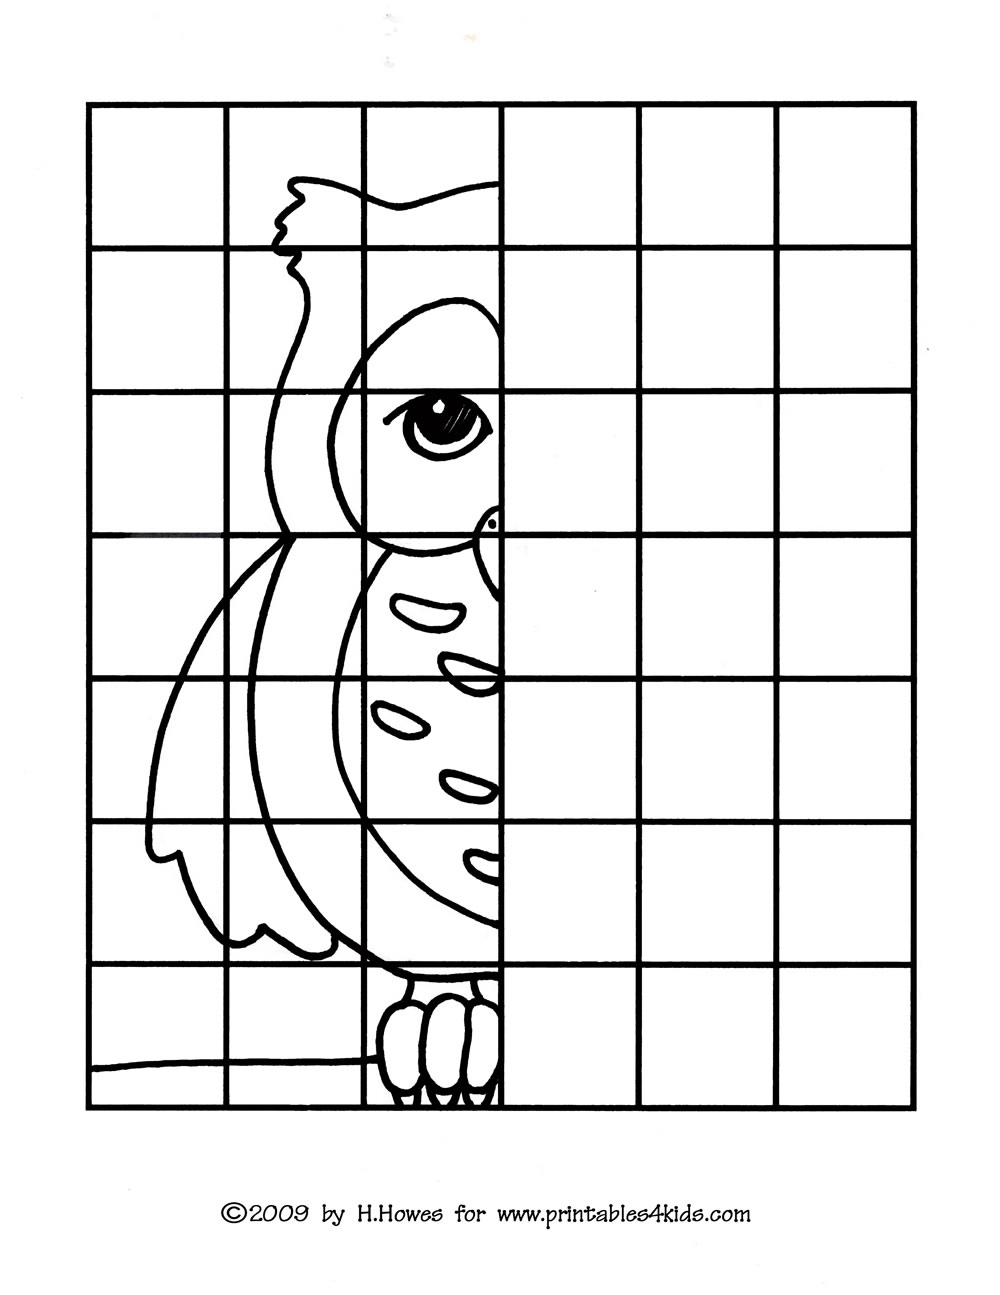 Printable Drawing Worksheets At PaintingValley Explore Collection 